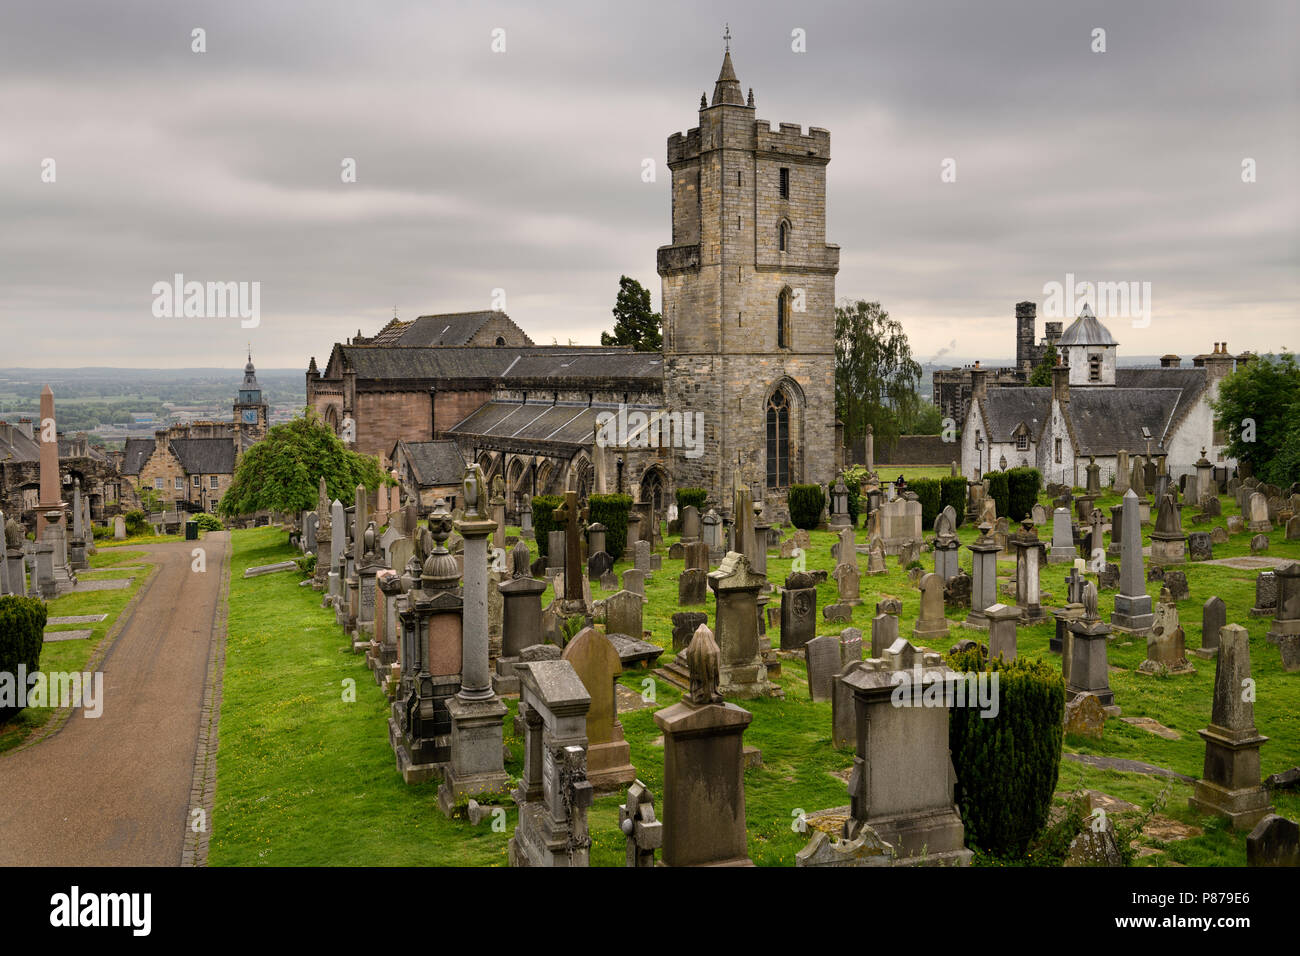 Church of the Holy Rude or Holy Cross with Bell tower and Royal Cemetery with historic gravestones on Castle Hill above Stirling Scotland UK Stock Photo